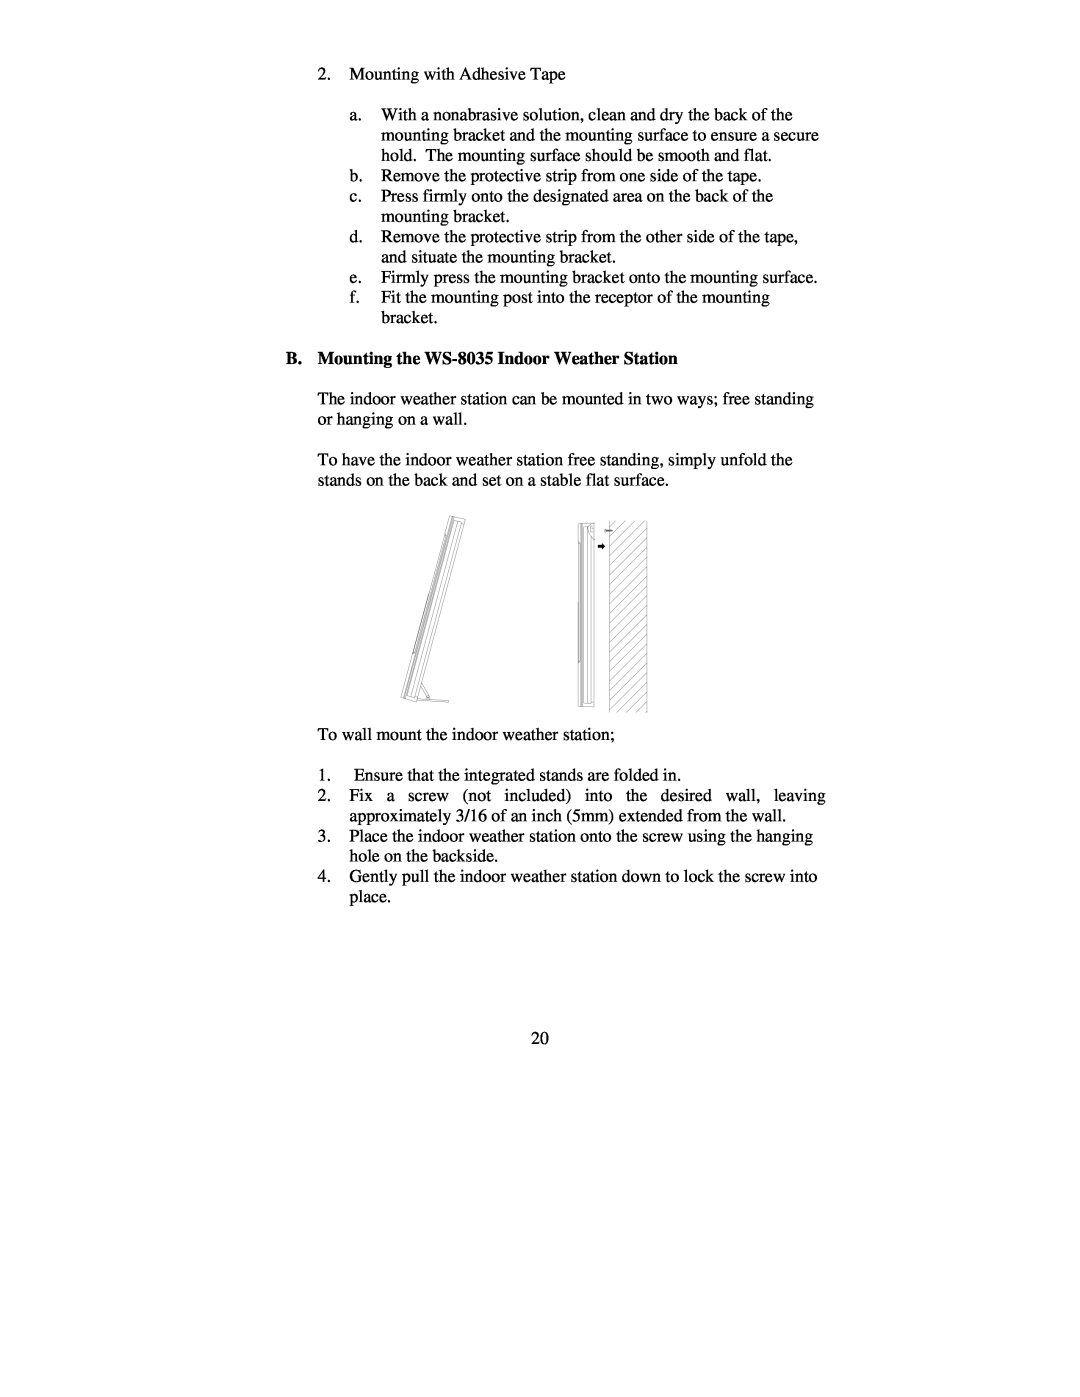 La Crosse Technology instruction manual B. Mounting the WS-8035 Indoor Weather Station 